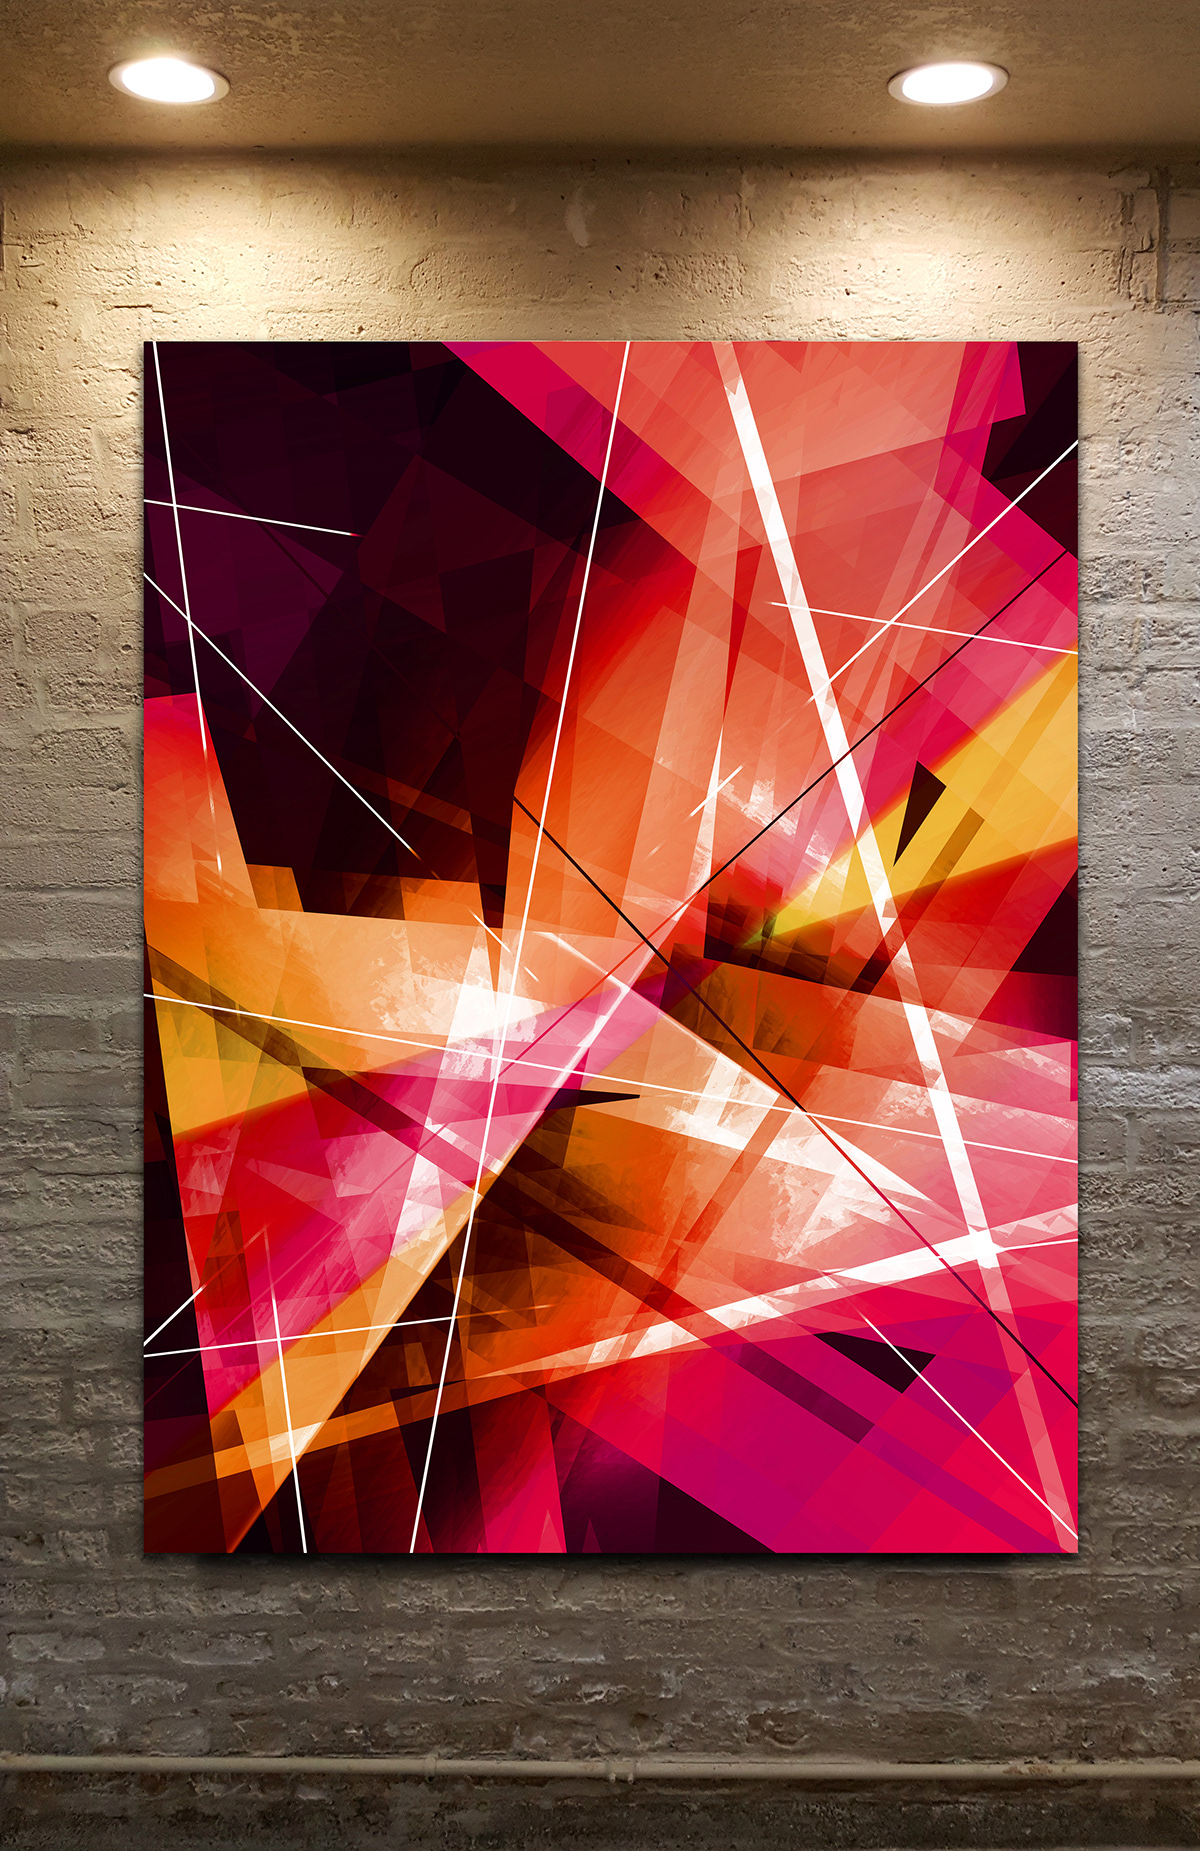 Geometric artwork Futuristic Abstract Art modern geometric art geometric abstract art transparent layers shapes and forms art prints Modern wall art Large Abstract Art graphic design 